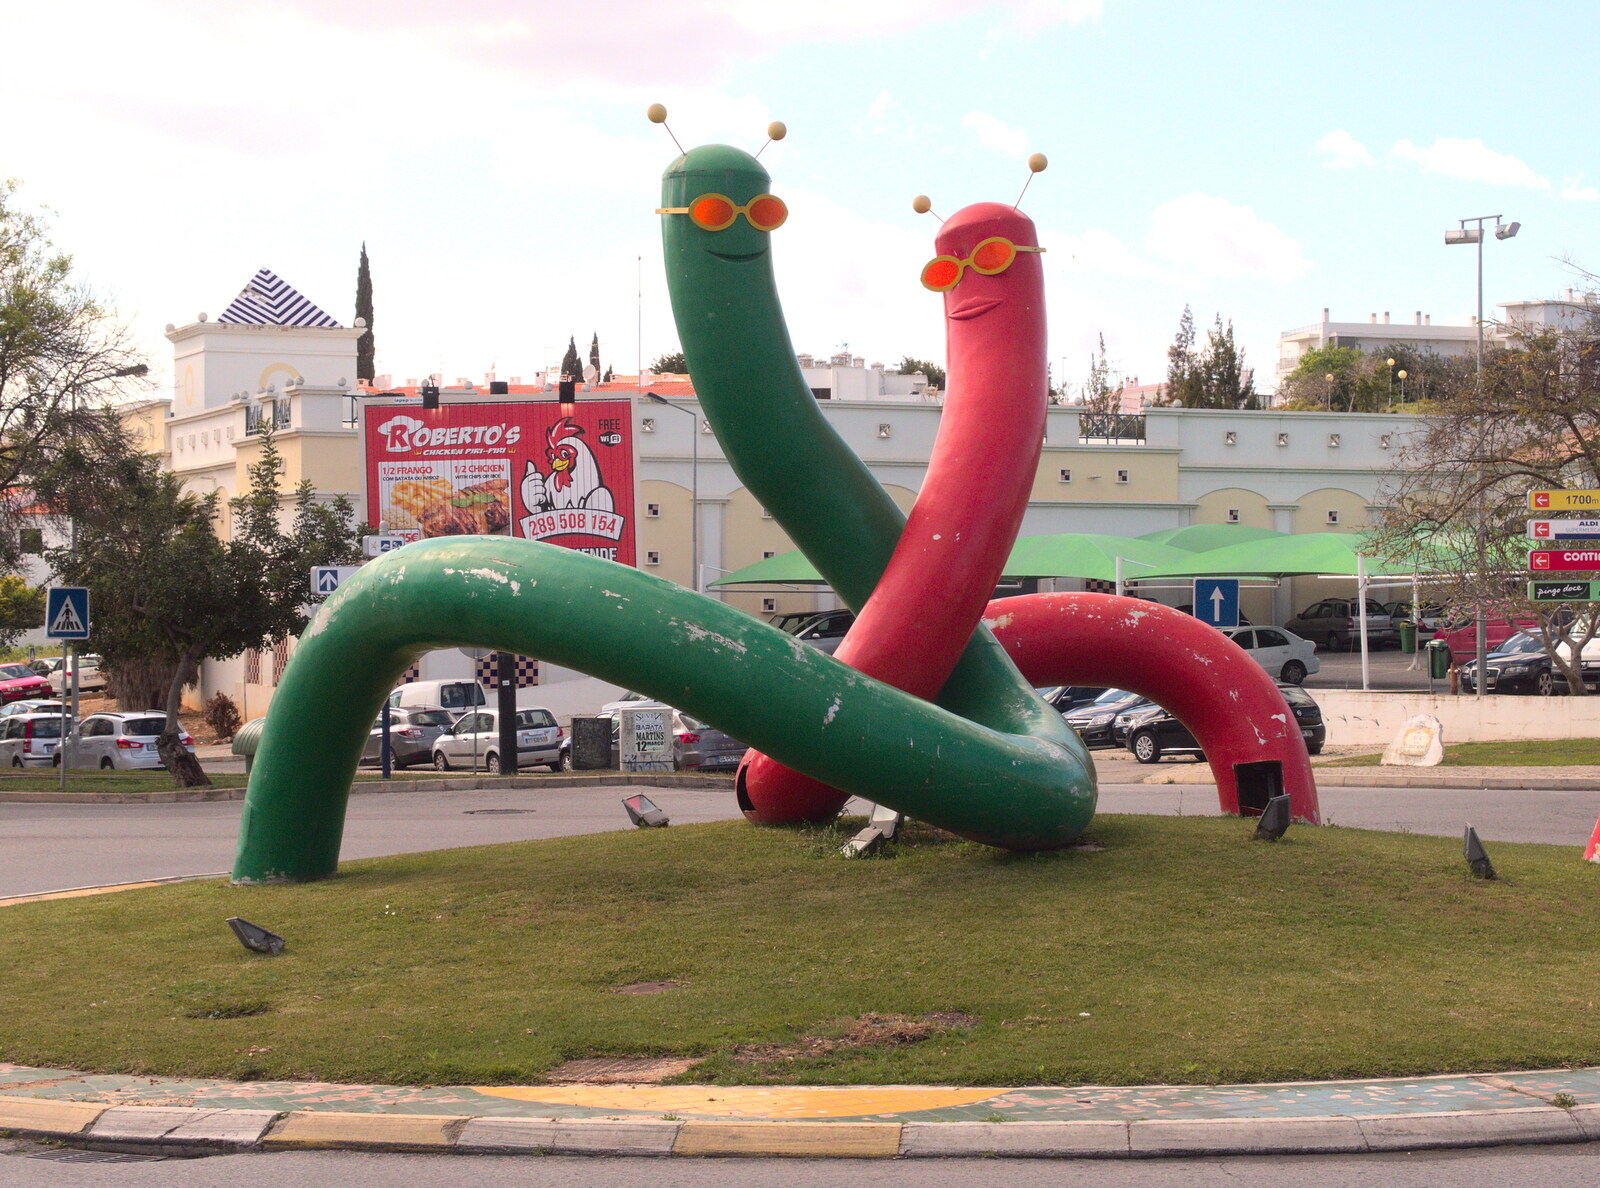 The comedy worms on a roundabout from A Trip to Albufeira: The Hotel Paraiso, Portugal - 3rd April 2016